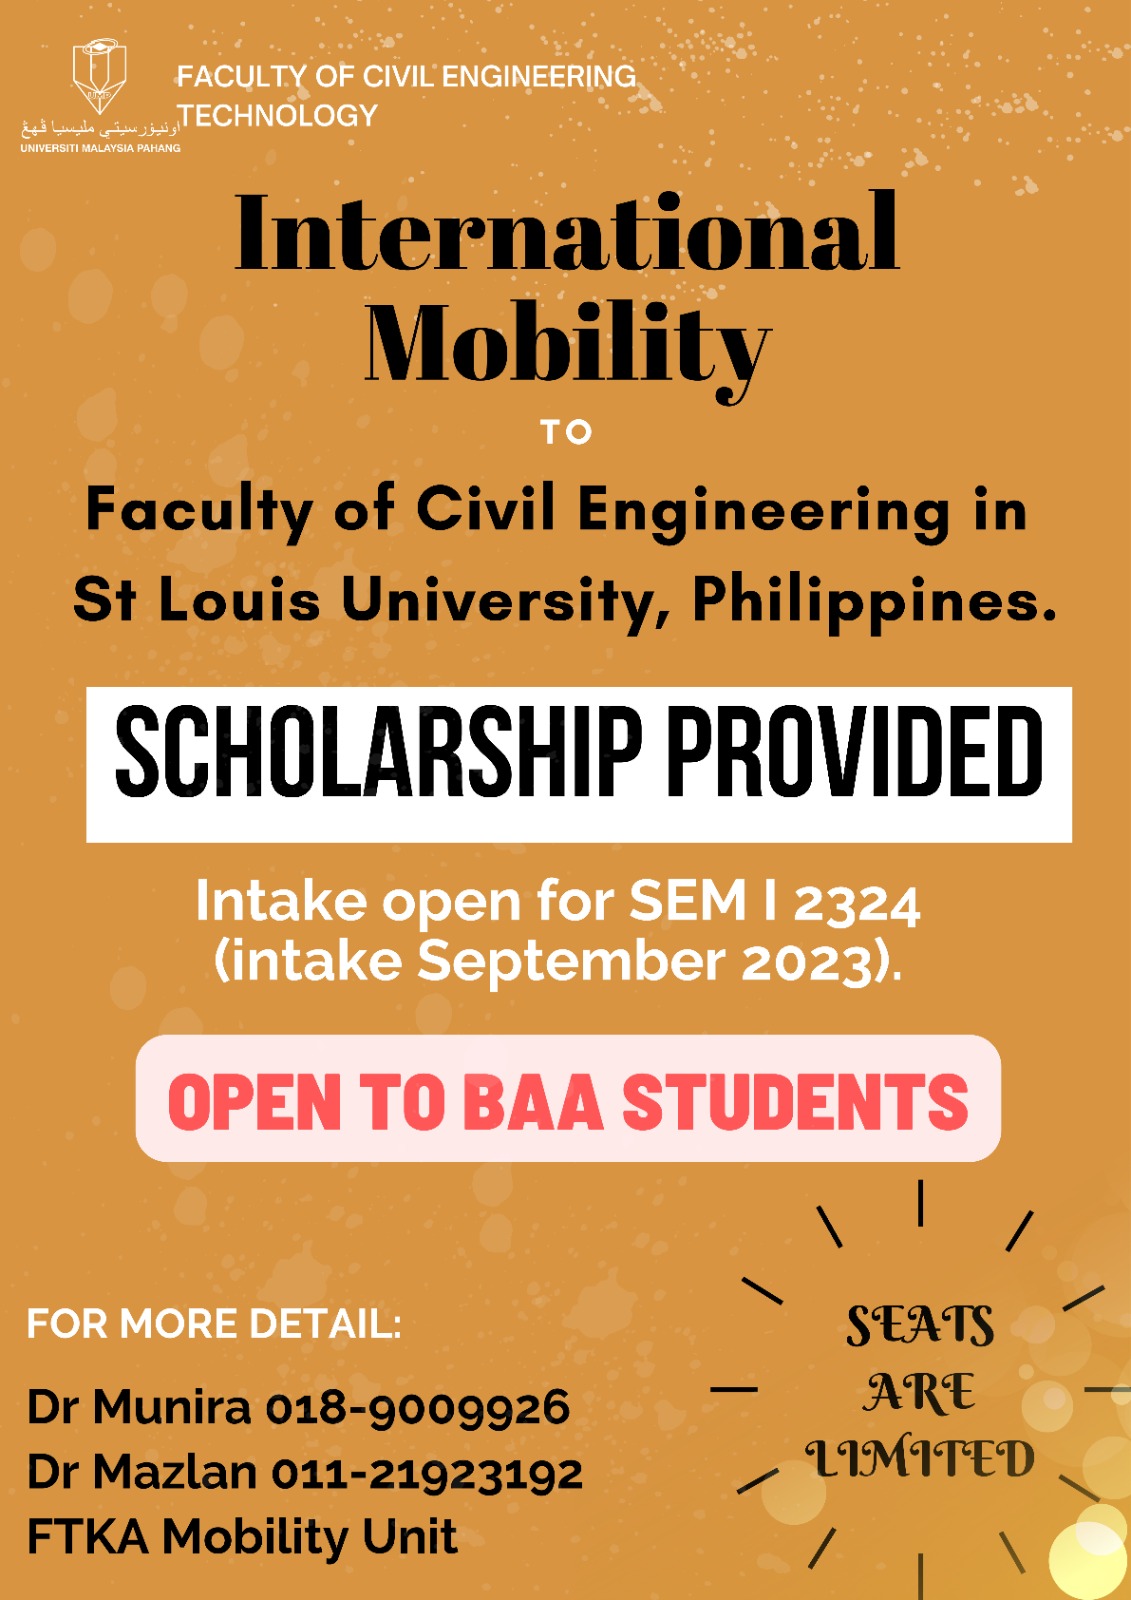 International Mobility to Faculty of Civil Engineering Technology in St Louis University, Philippines. Intake open for SEM I 23/24 (intake September 2023)